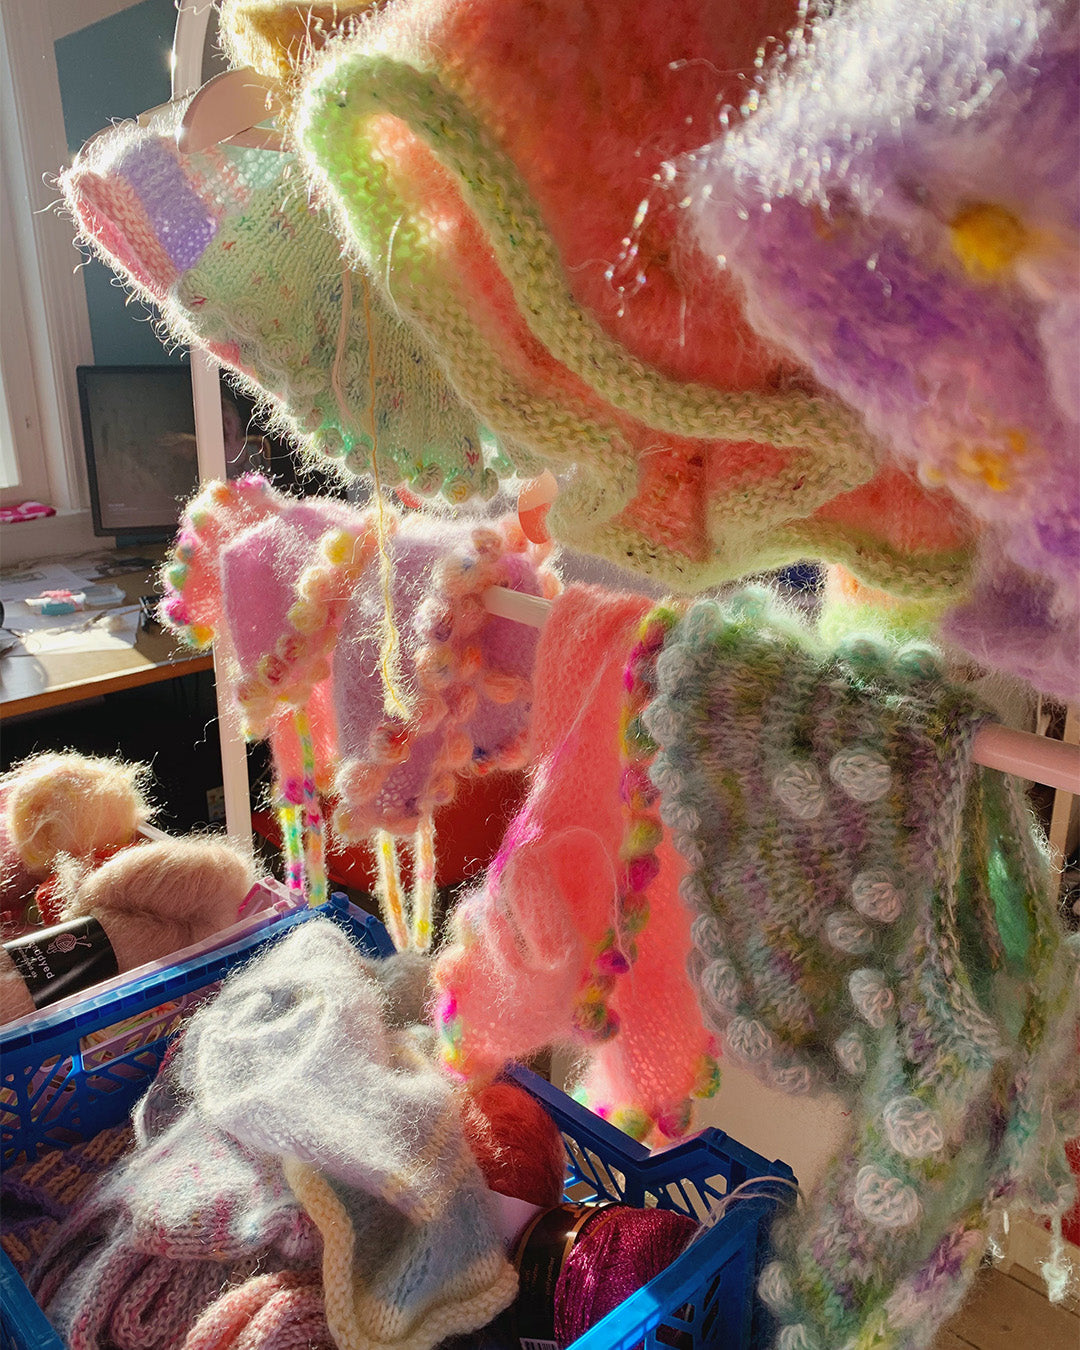 A close-up of fluffy, colorful knitwear and yarns in various stages of the crafting process, with sunlight filtering through, highlighting the textures and the lively chaos of a creative workspace.